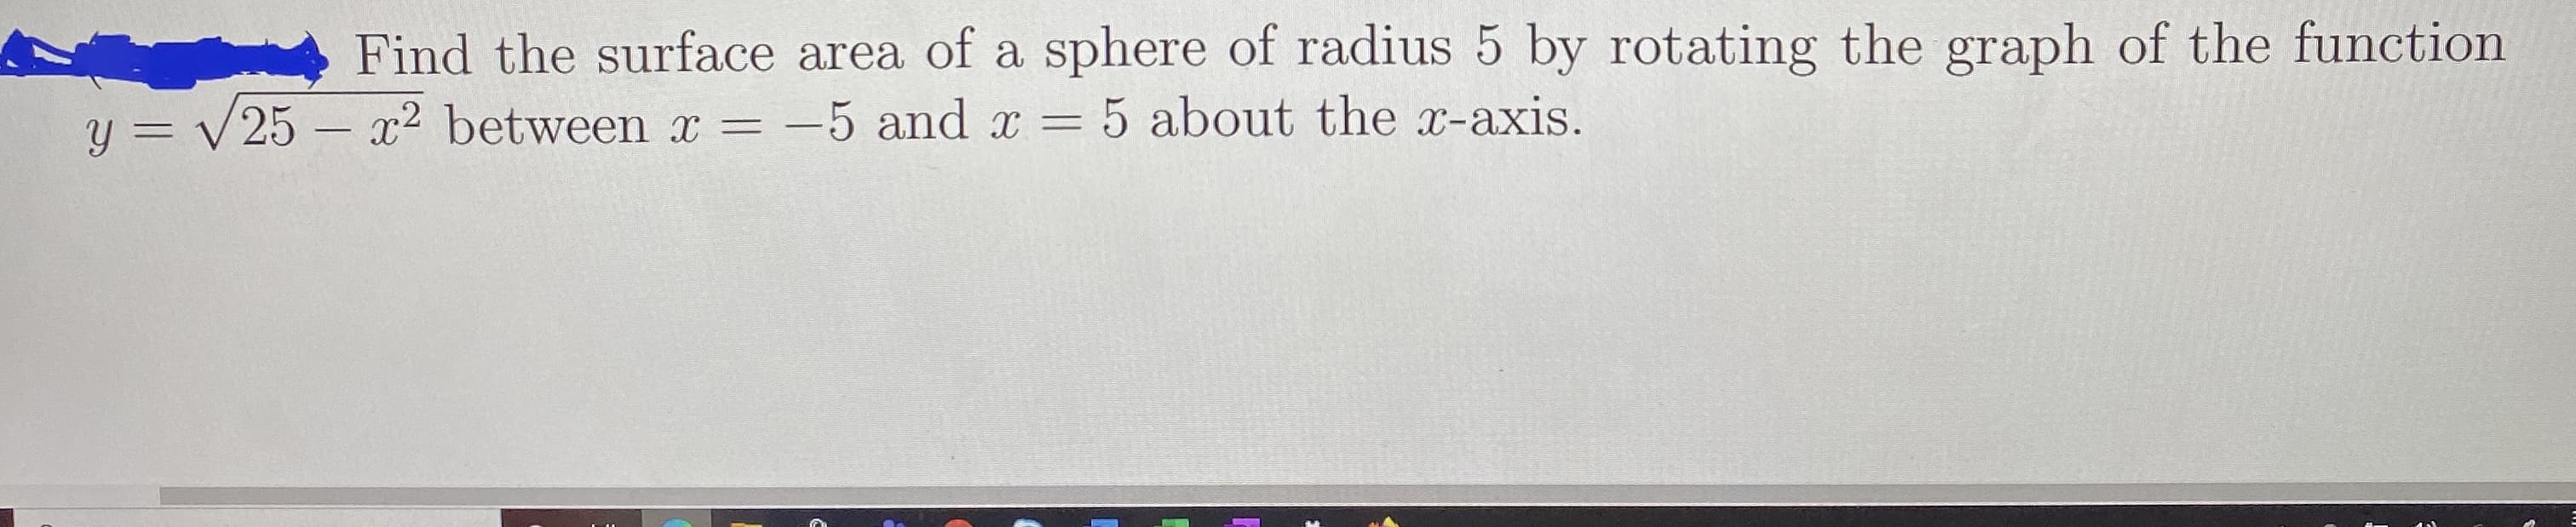 Find the surface area of a sphere of radius 5 by rotating the graph OI the function
x2 between x =
-5 and x = 5 about the x-axis.
|
